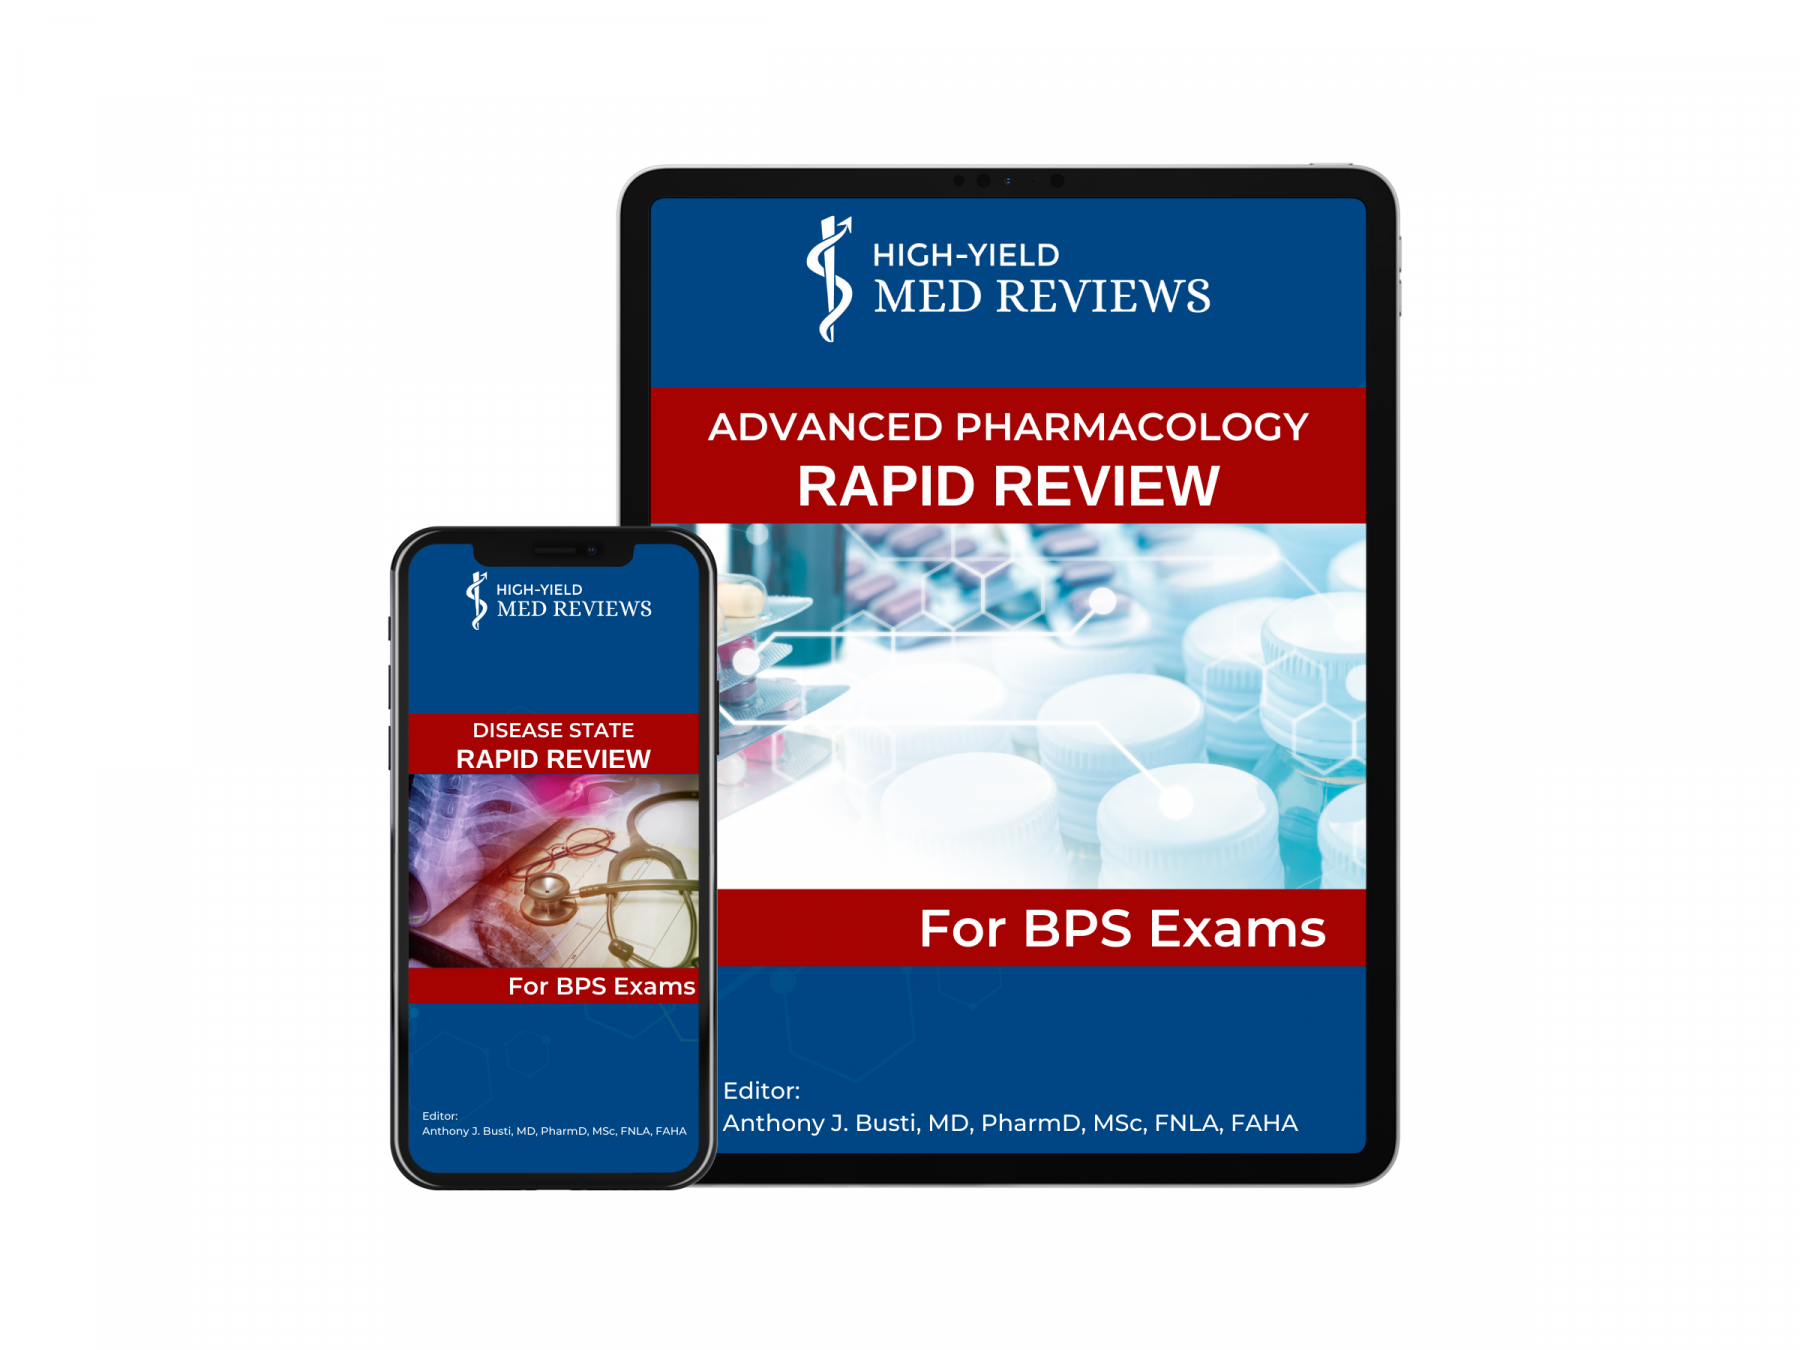 Rapid Review Webinars for Board of Pharmacy Specialty (BPS) Exams with High-Yield Med Reviews